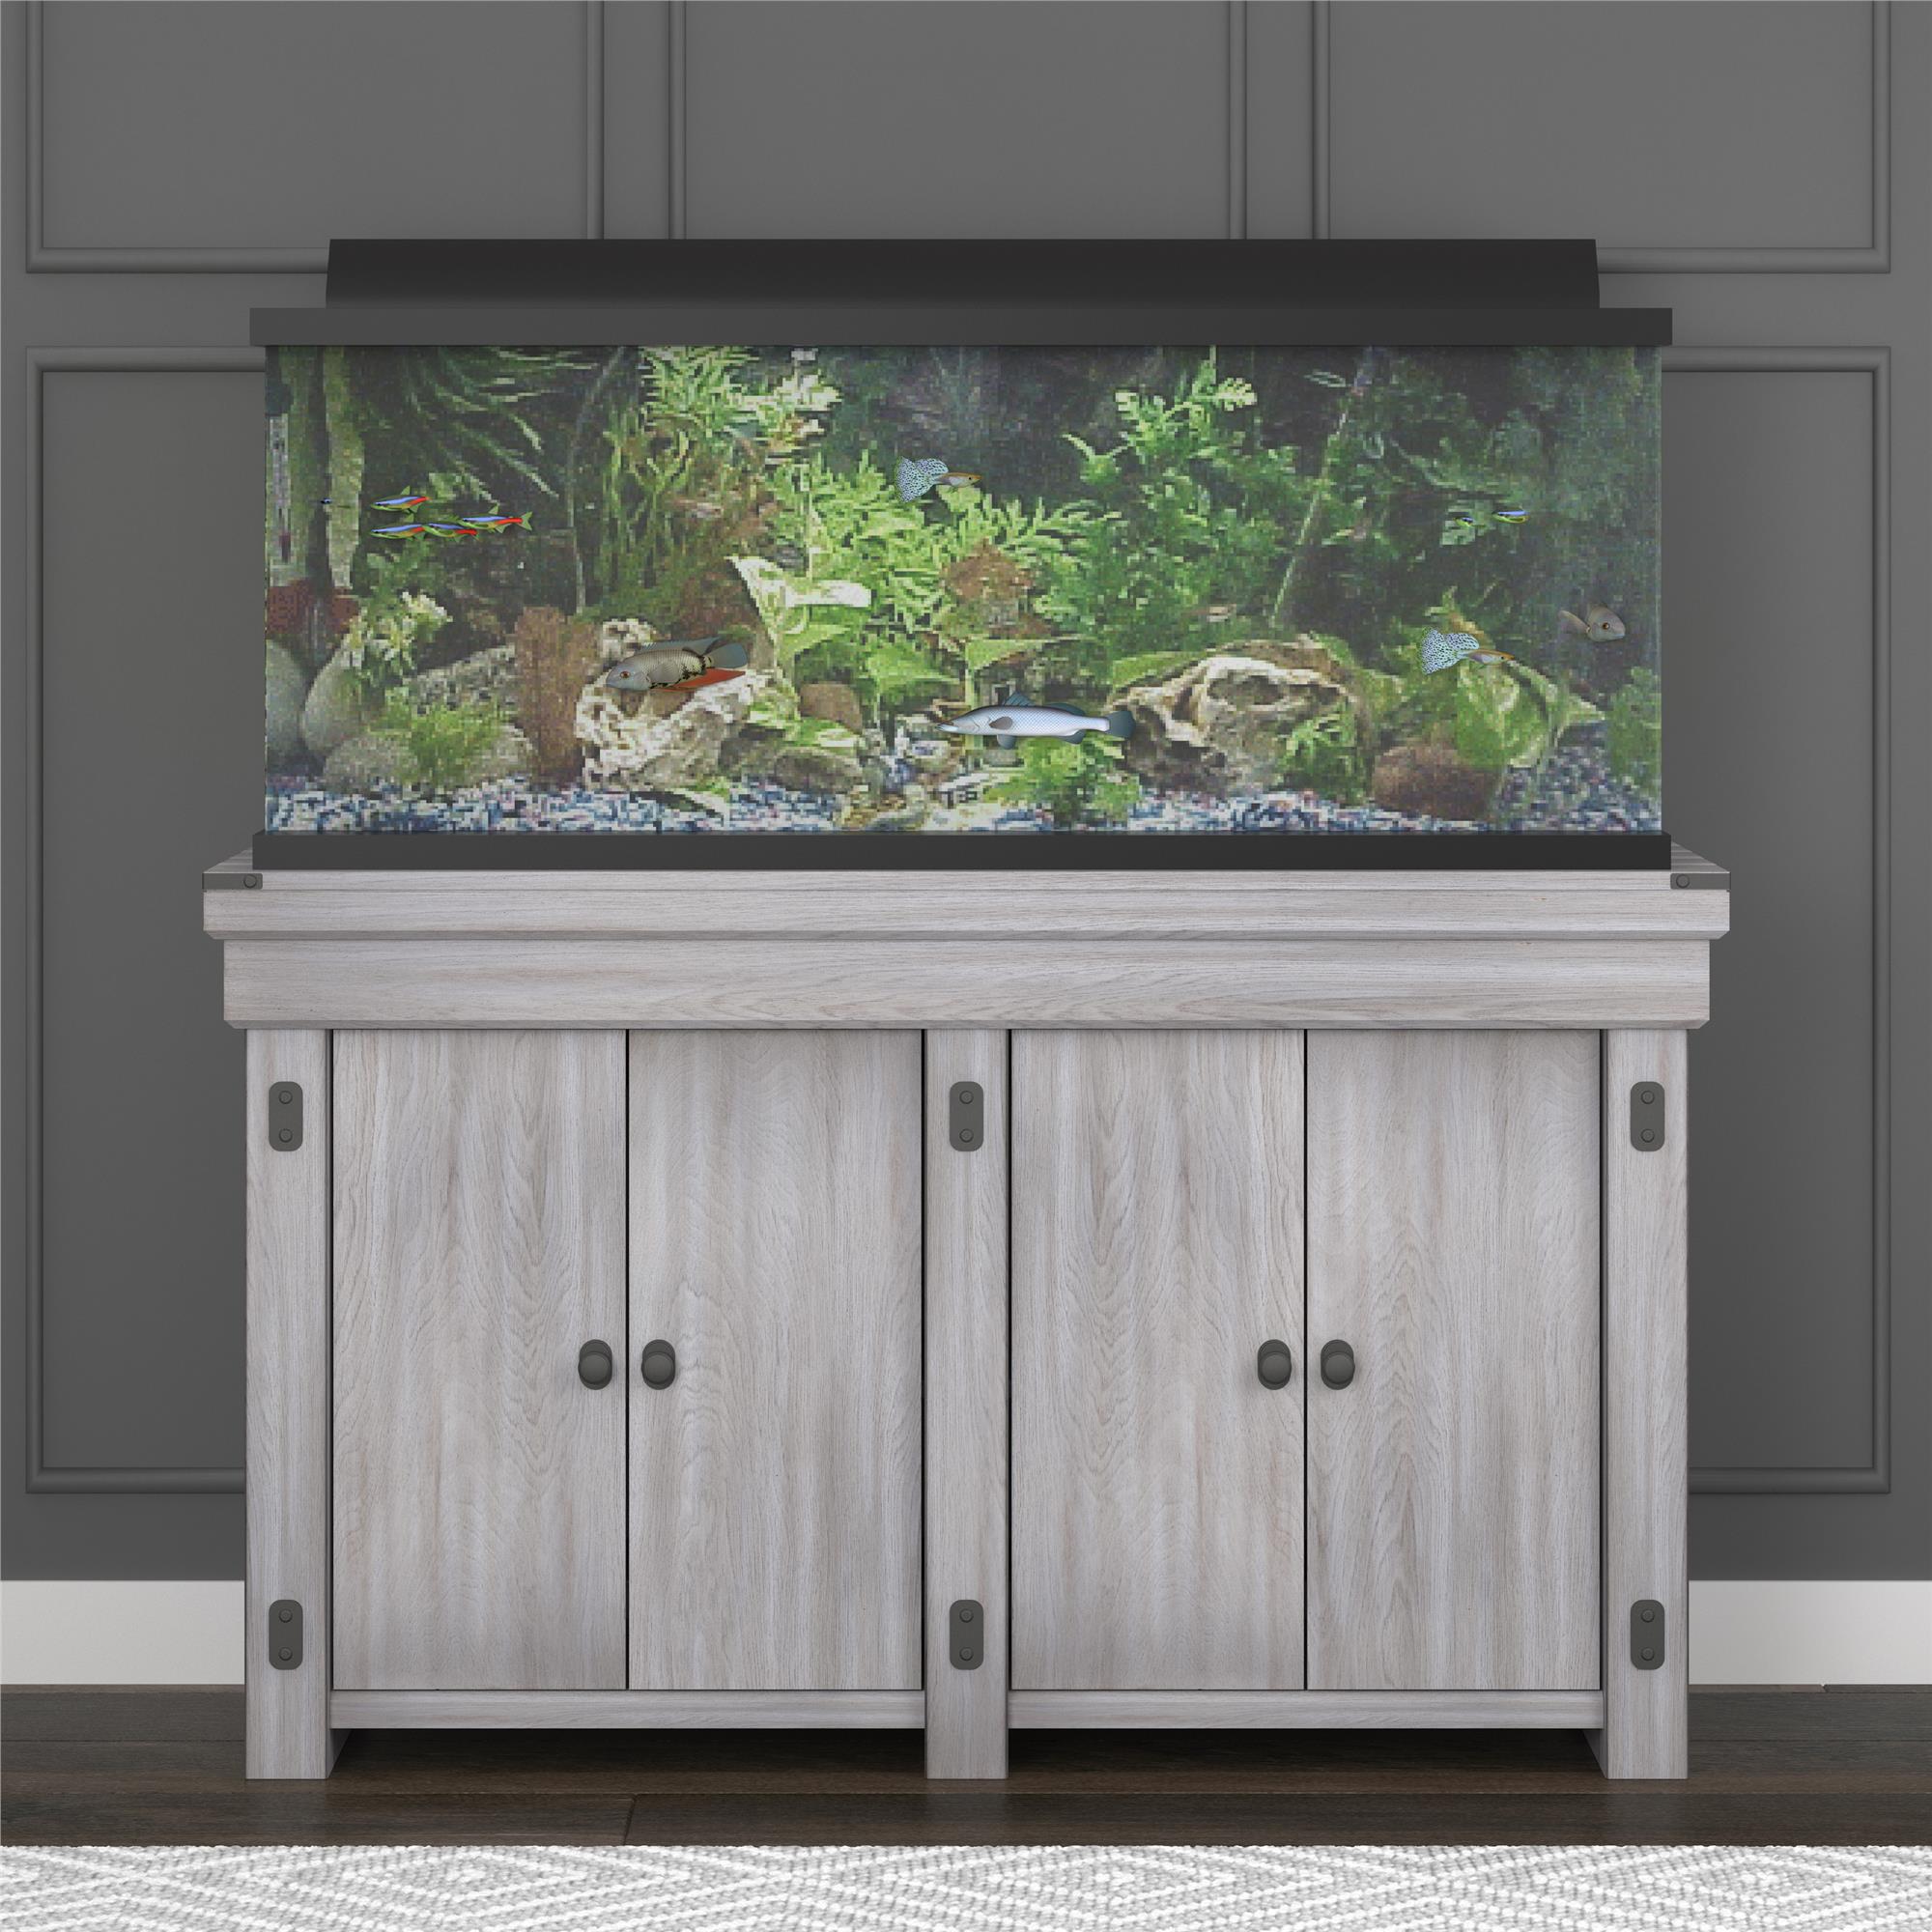 Flipper by Ollie & Hutch Wildwood 55 Gallon Aquarium Stand, Rustic White - image 1 of 14